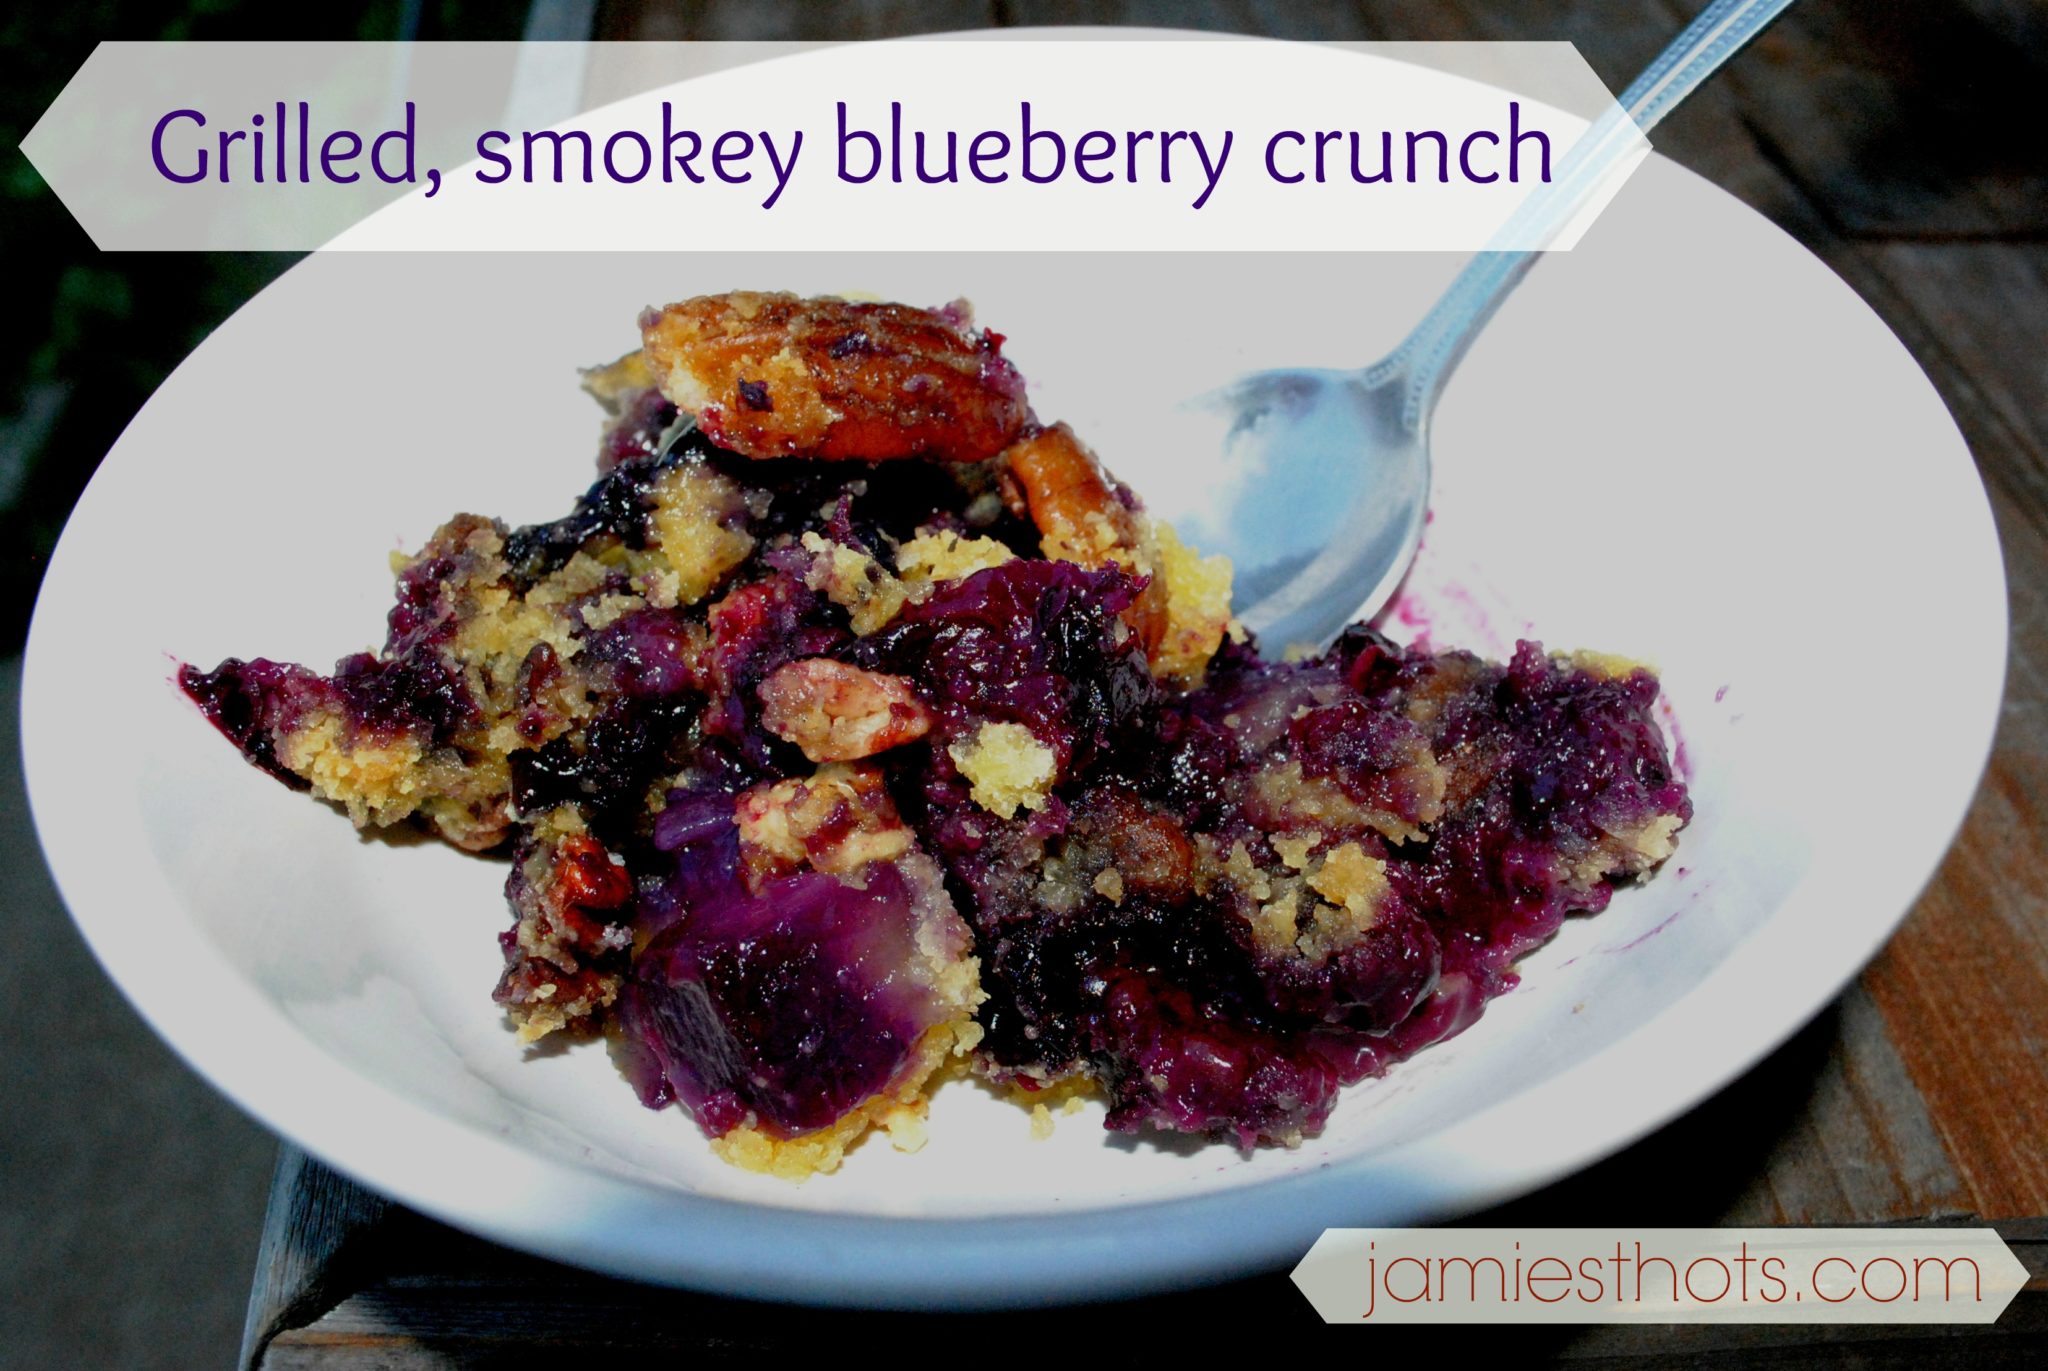 When your husband loves blueberry, you love it when you find recipes like this smokey grilled blueberry crunch